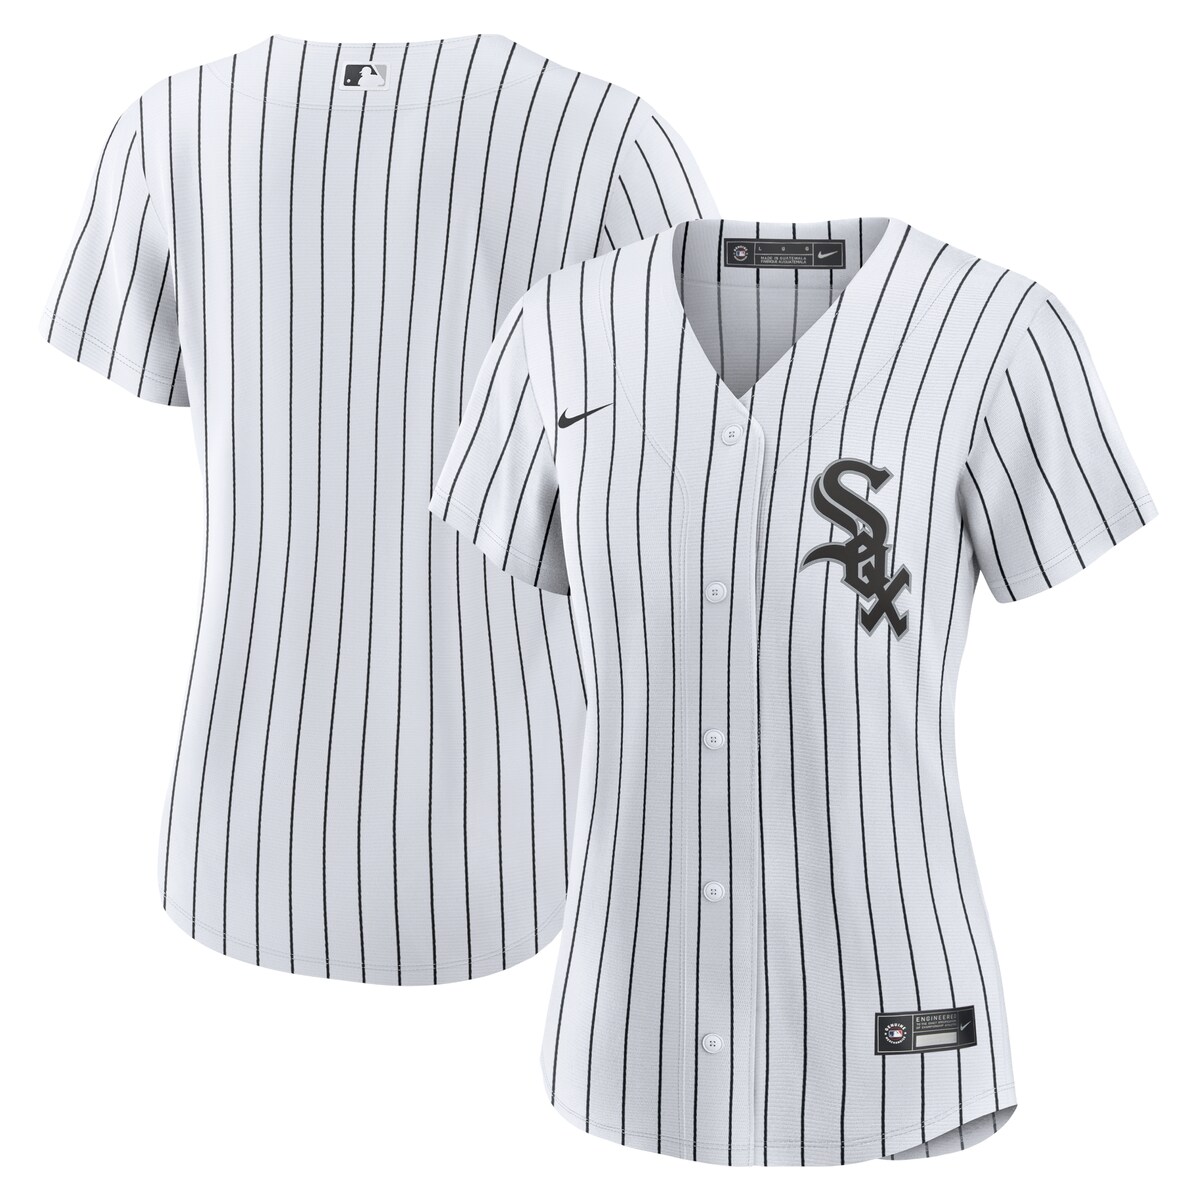 As the ultimate Chicago White Sox fan, you deserve the same look that your favorite players sport out on the field. This Replica Team jersey from Nike brings the team's official design to your wardrobe for a consistently spirited look on game day. The polyester material and slick Chicago White Sox graphics are just what any fan needs to look and feel their best.MLB Batterman applique on center back neckReplica JerseyOfficially licensedMachine wash gentle or dry clean. Tumble dry low, hang dry preferred.Heat-sealed transfer appliqueJersey Color Style: HomeRounded hemFull-button frontMaterial: 100% PolyesterShort sleeveHeat-sealed jock tagImportedBrand: Nike